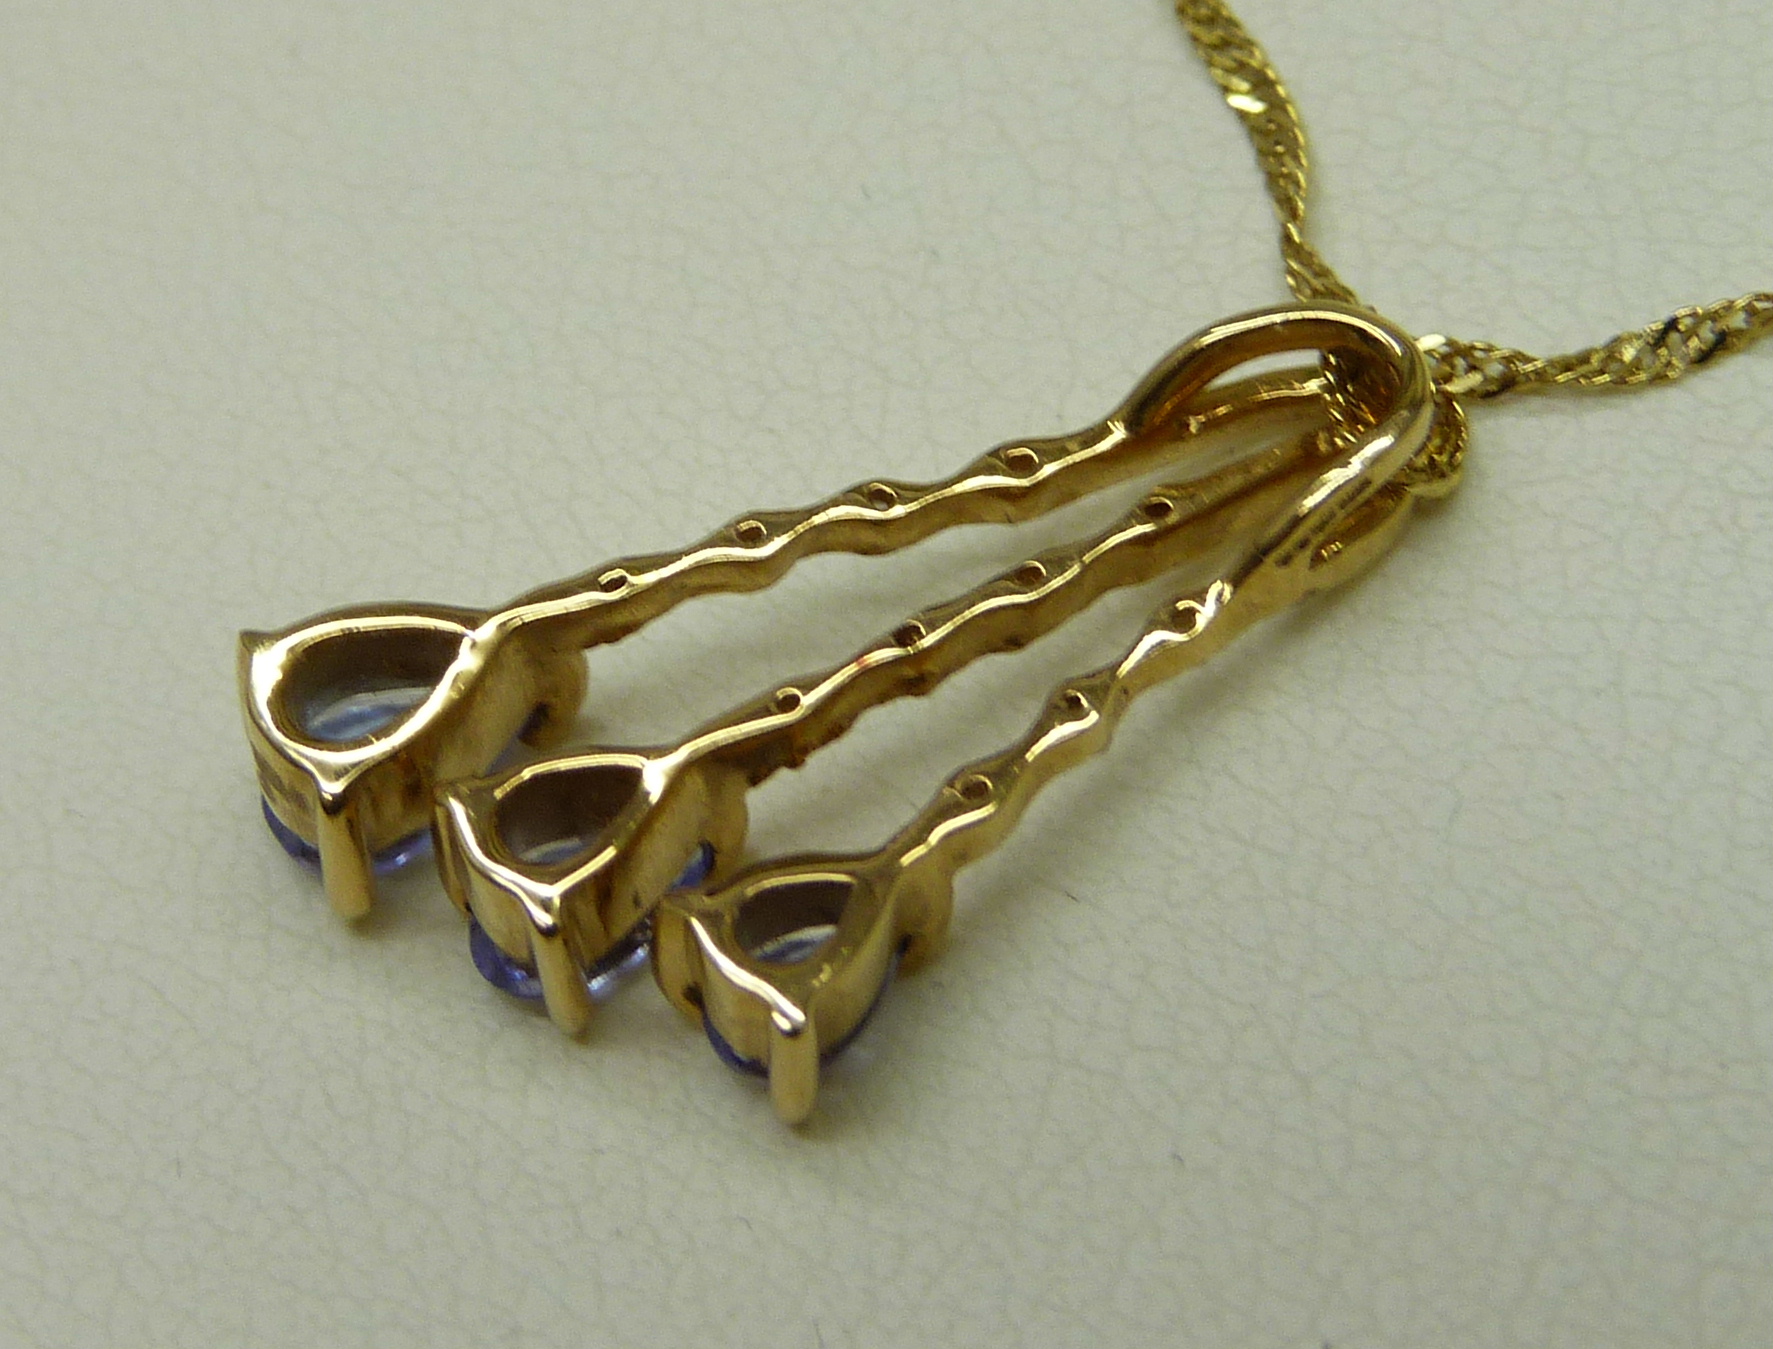 An 18ct yellow gold pendant set with small diamonds and three pear shape grade AAA tanzanite stones, - Image 4 of 6